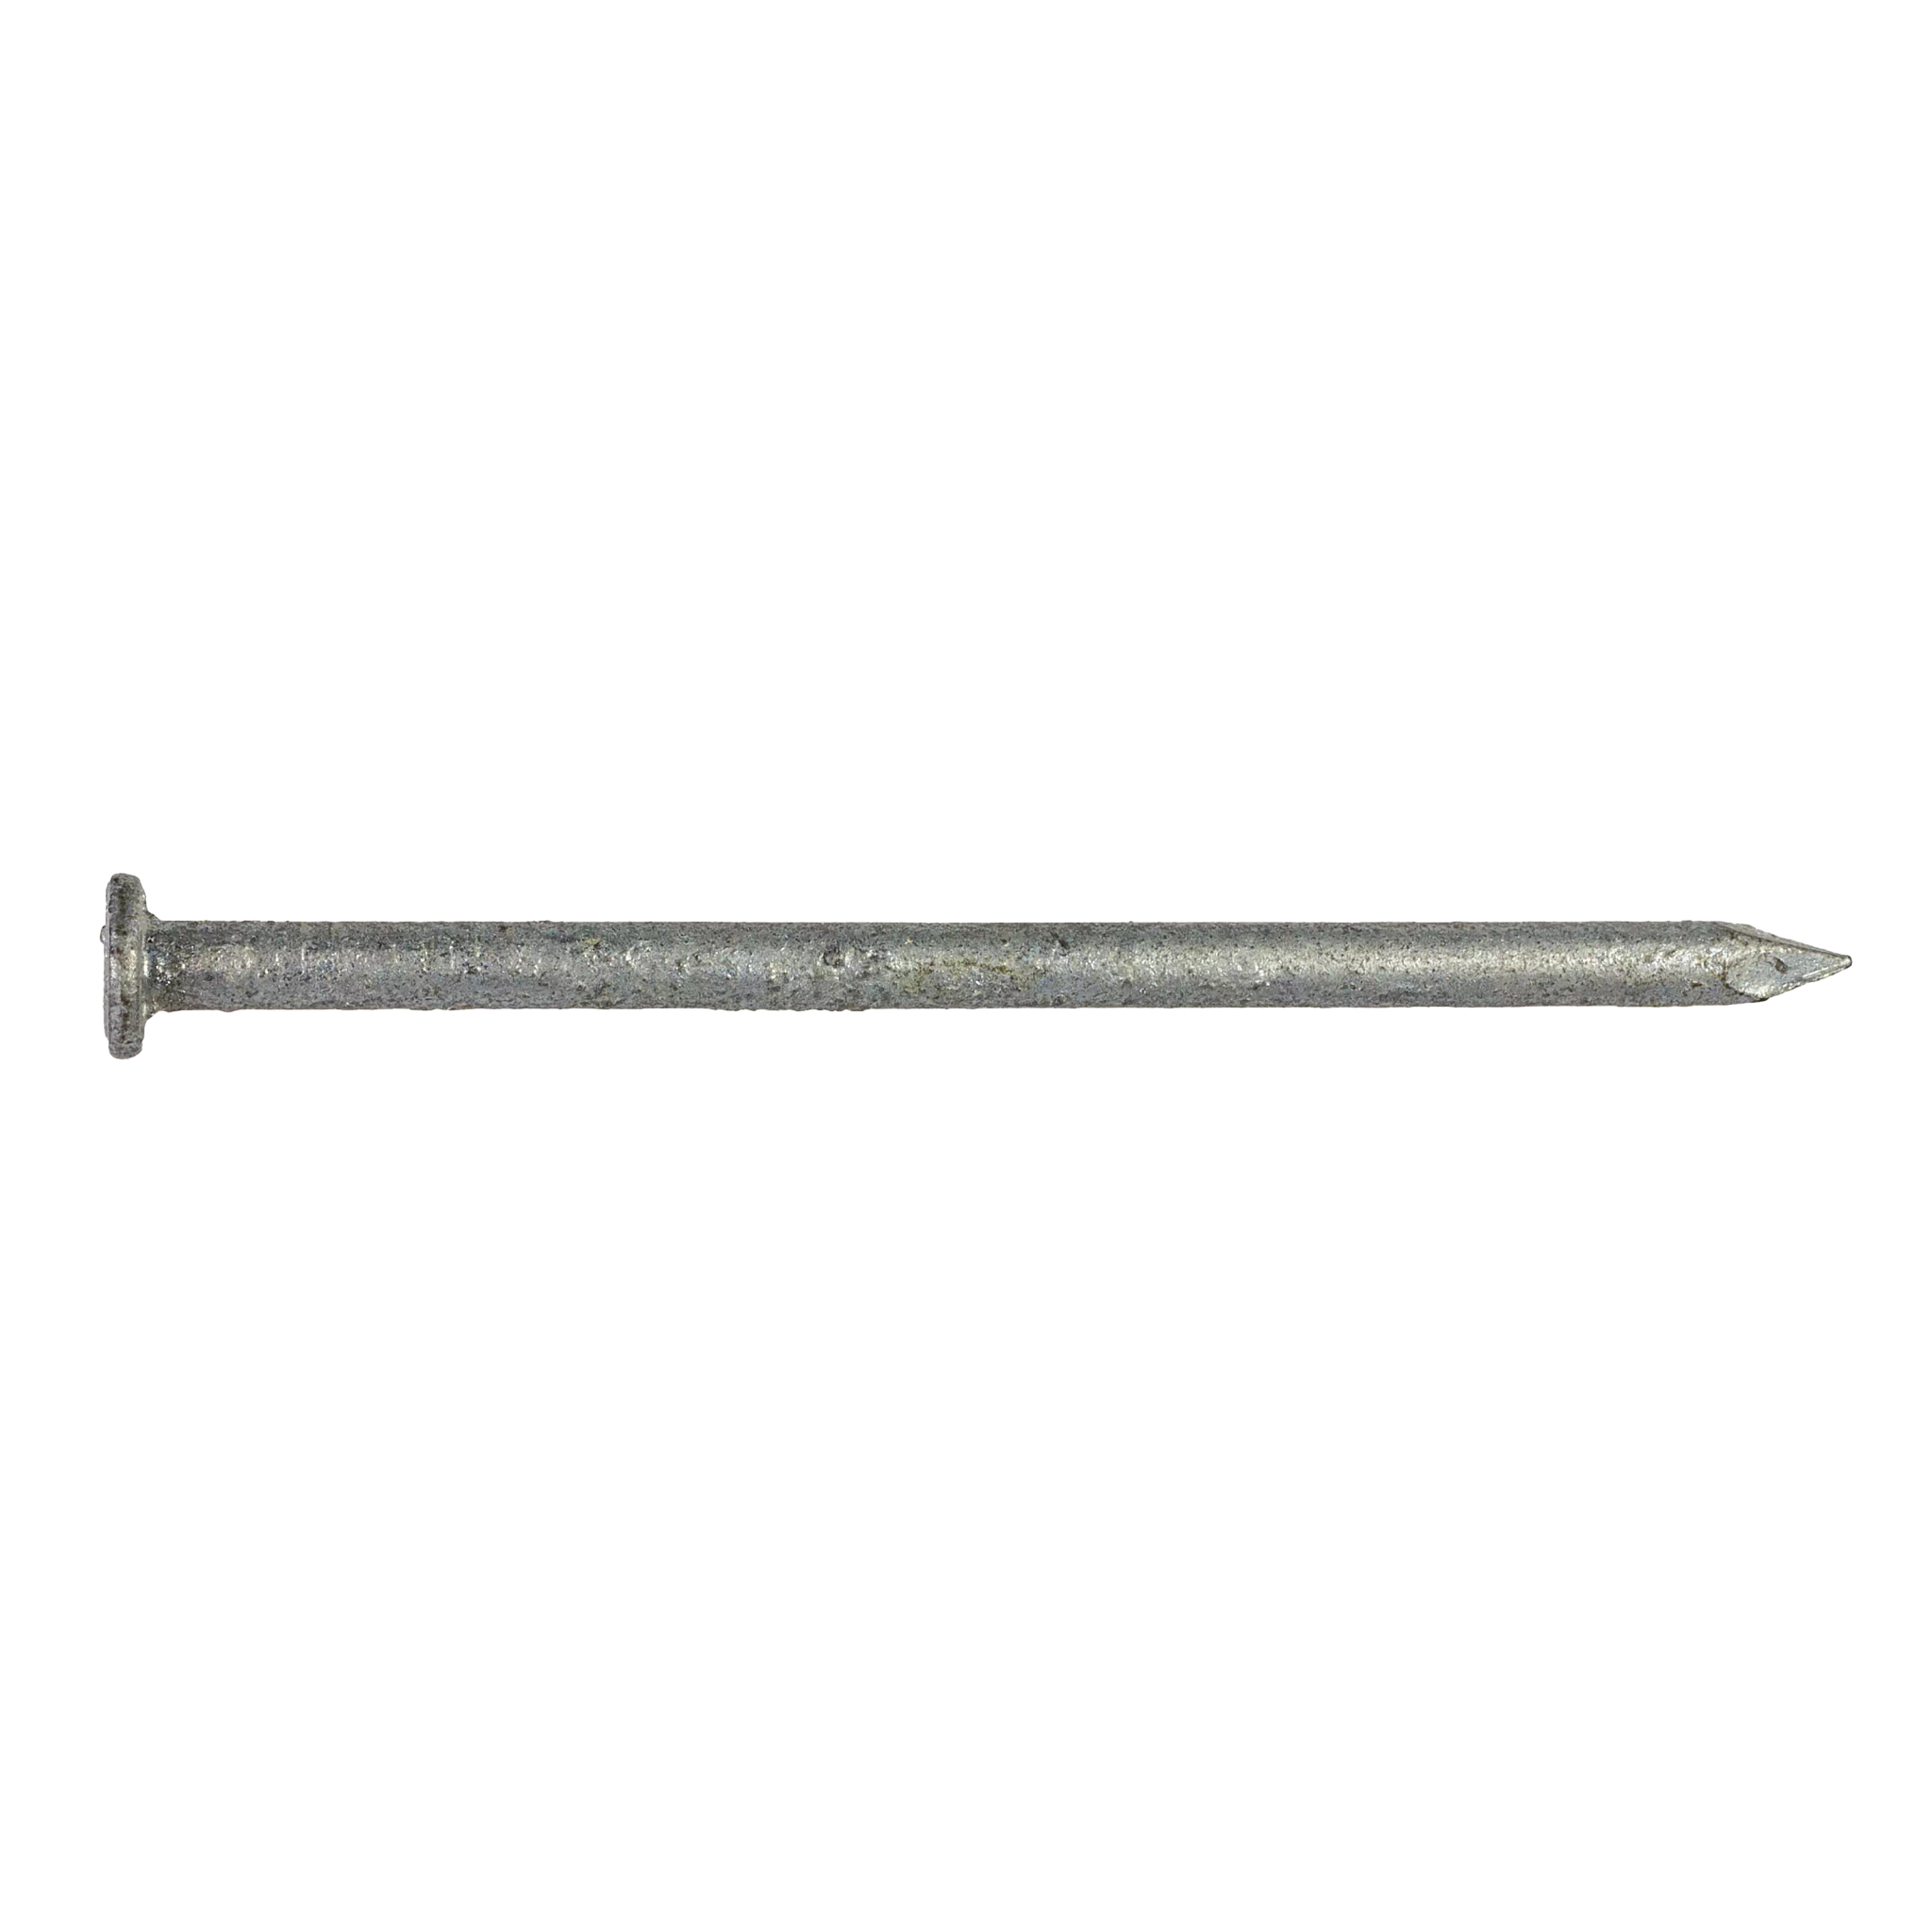 .148"x3" Strong-Drive® Smooth Shank Connector Nail, Hot Dipped Galvanized (50/BX)